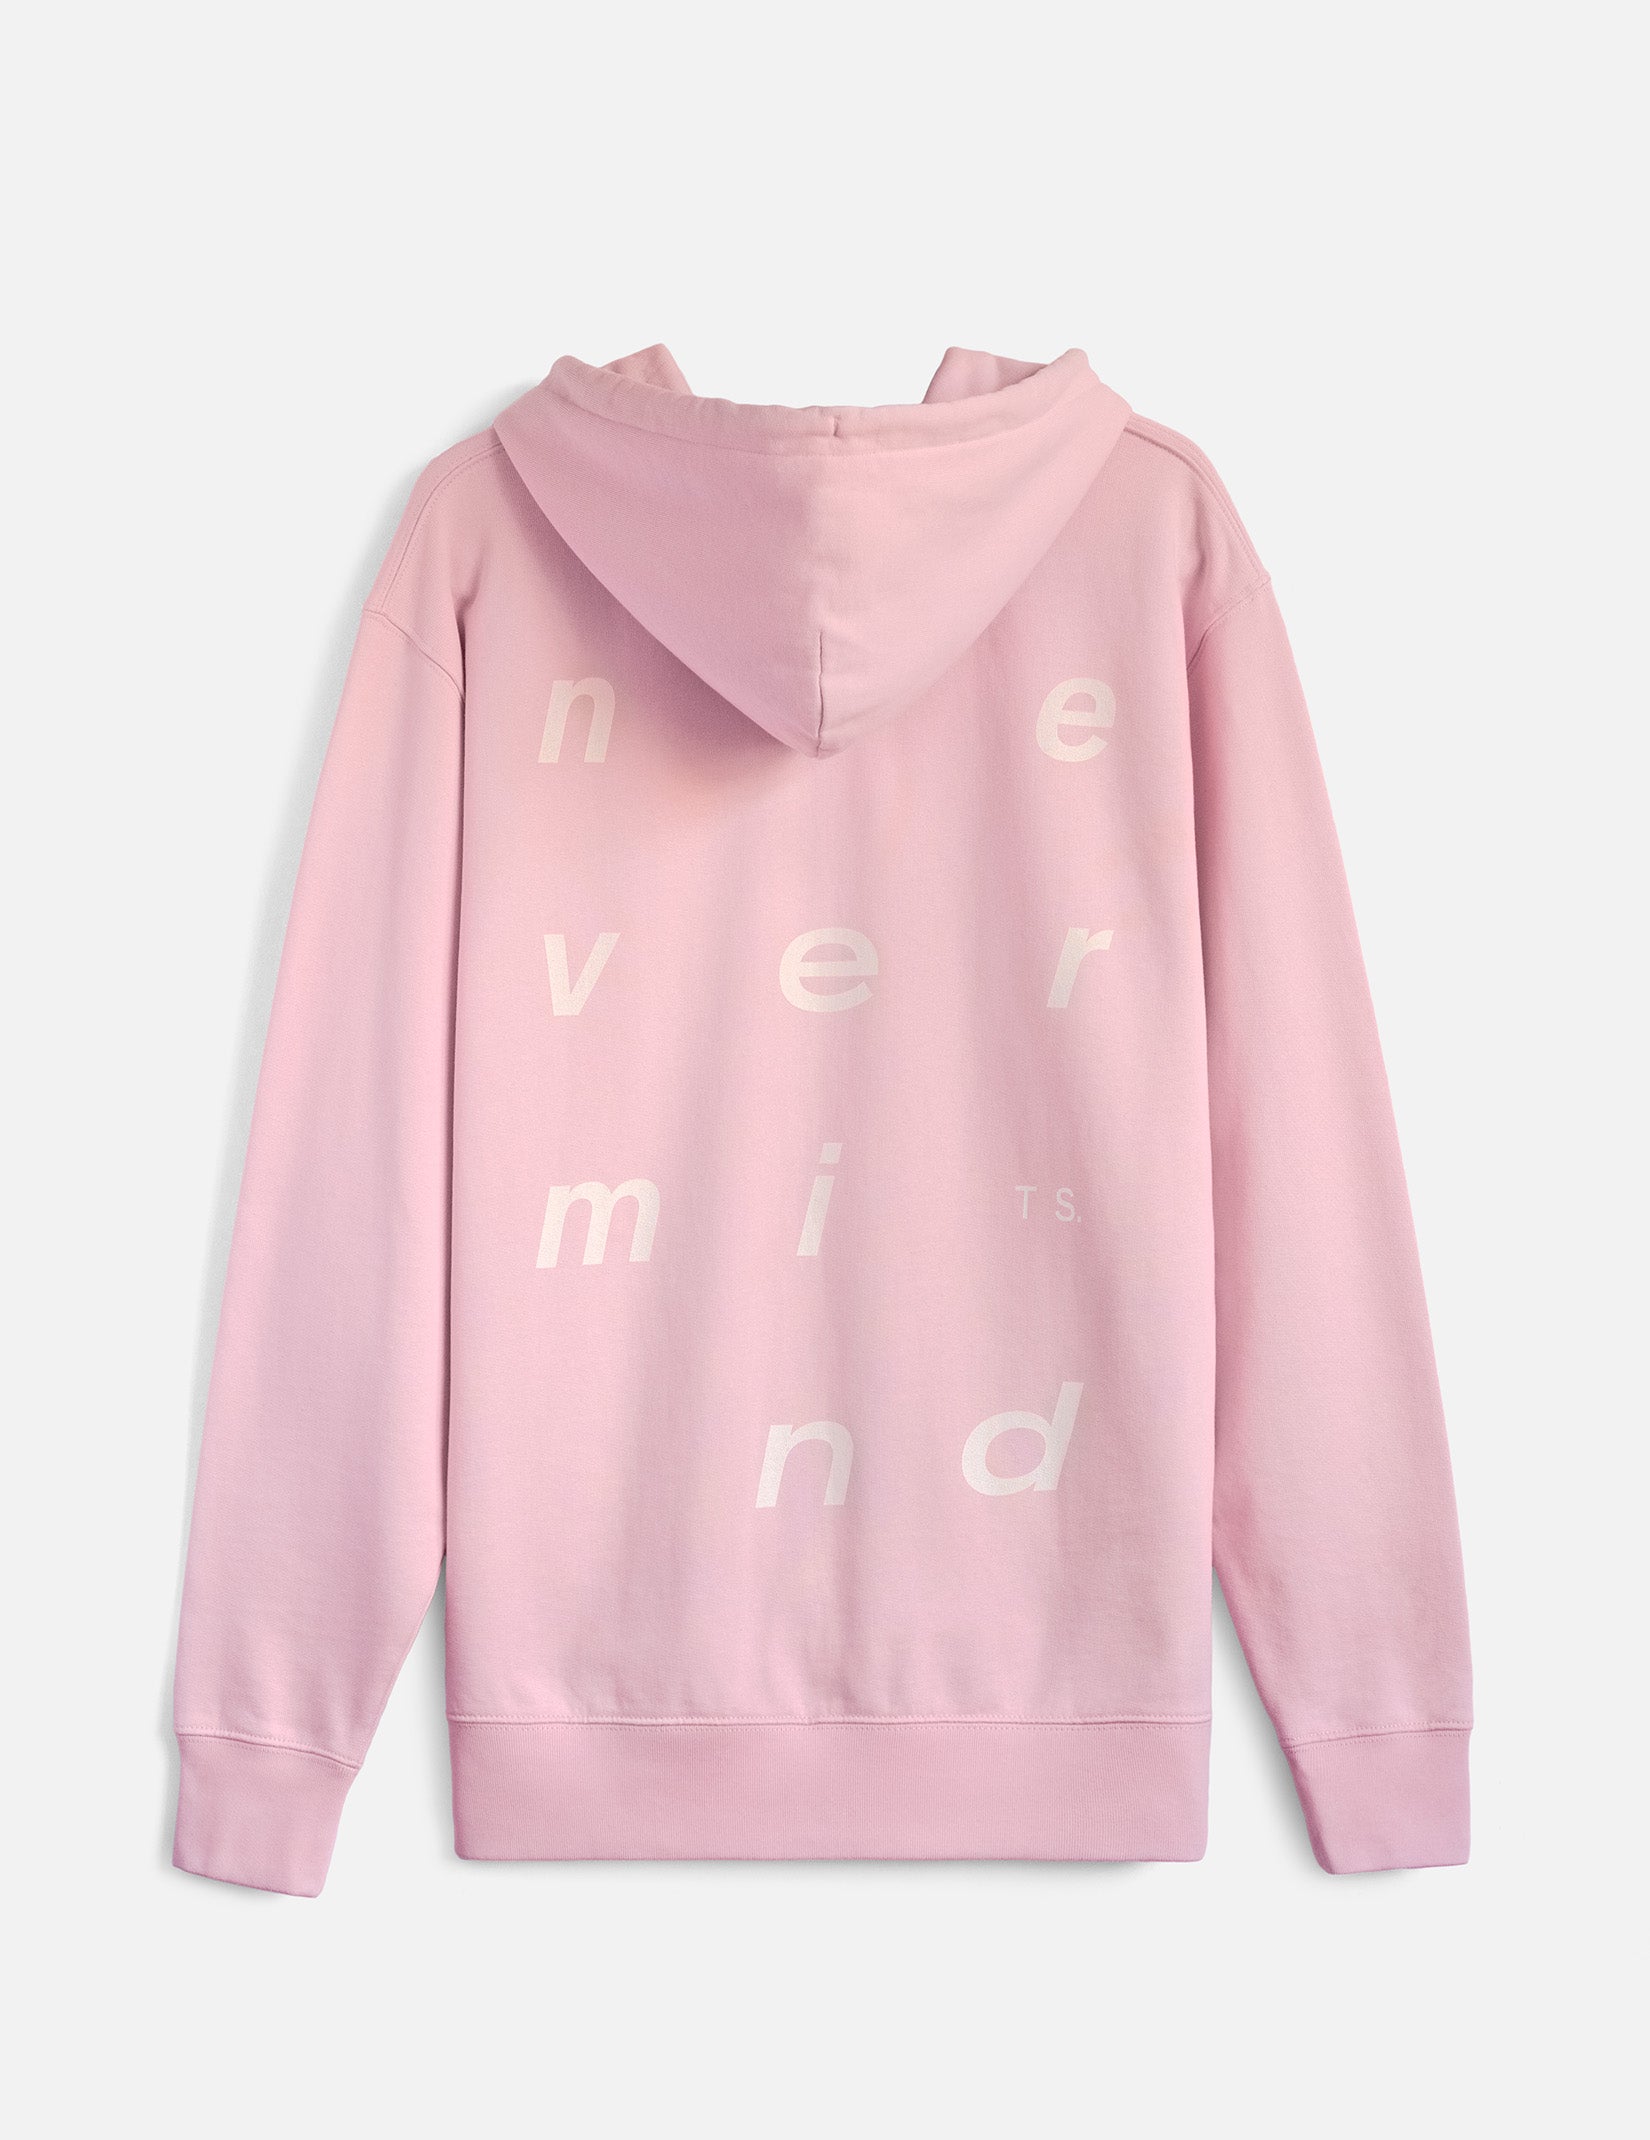 A pink hoodie viewed from the back with a print that says 'never mind' in large spaced out letters